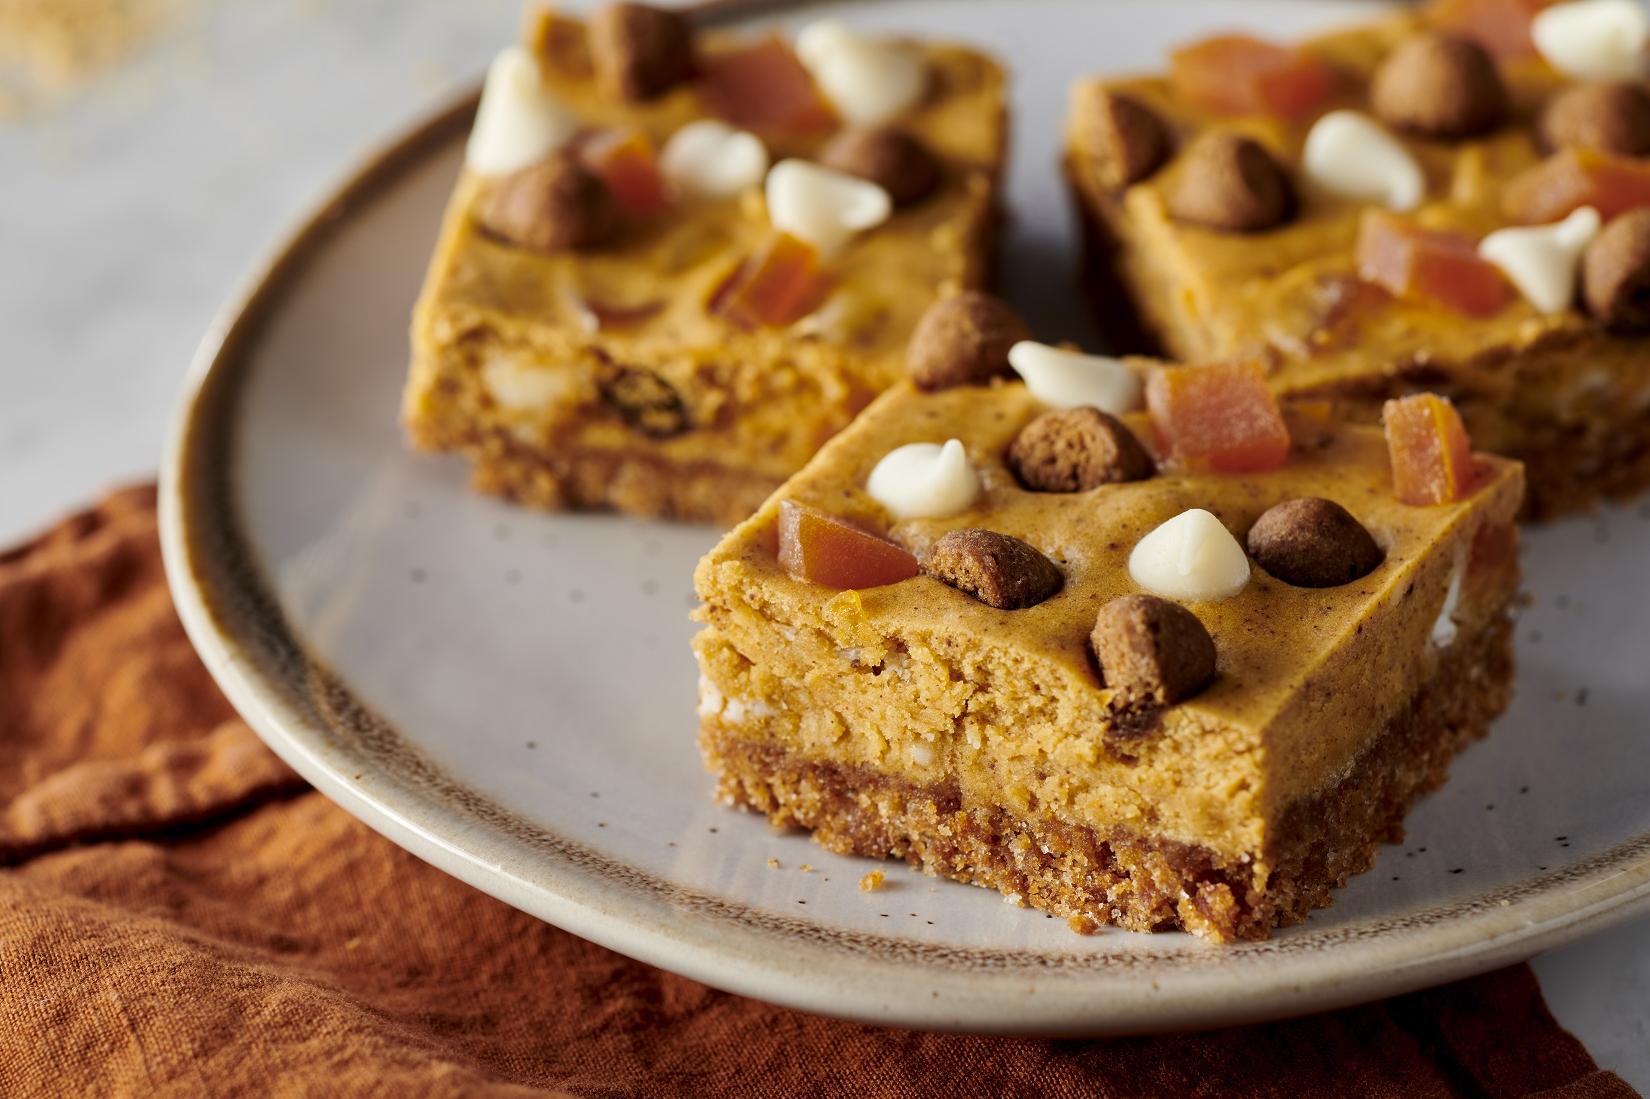  Nothing screams fall like a warm pumpkin drink, especially when it's mixed with the sweetness of cheesecake.